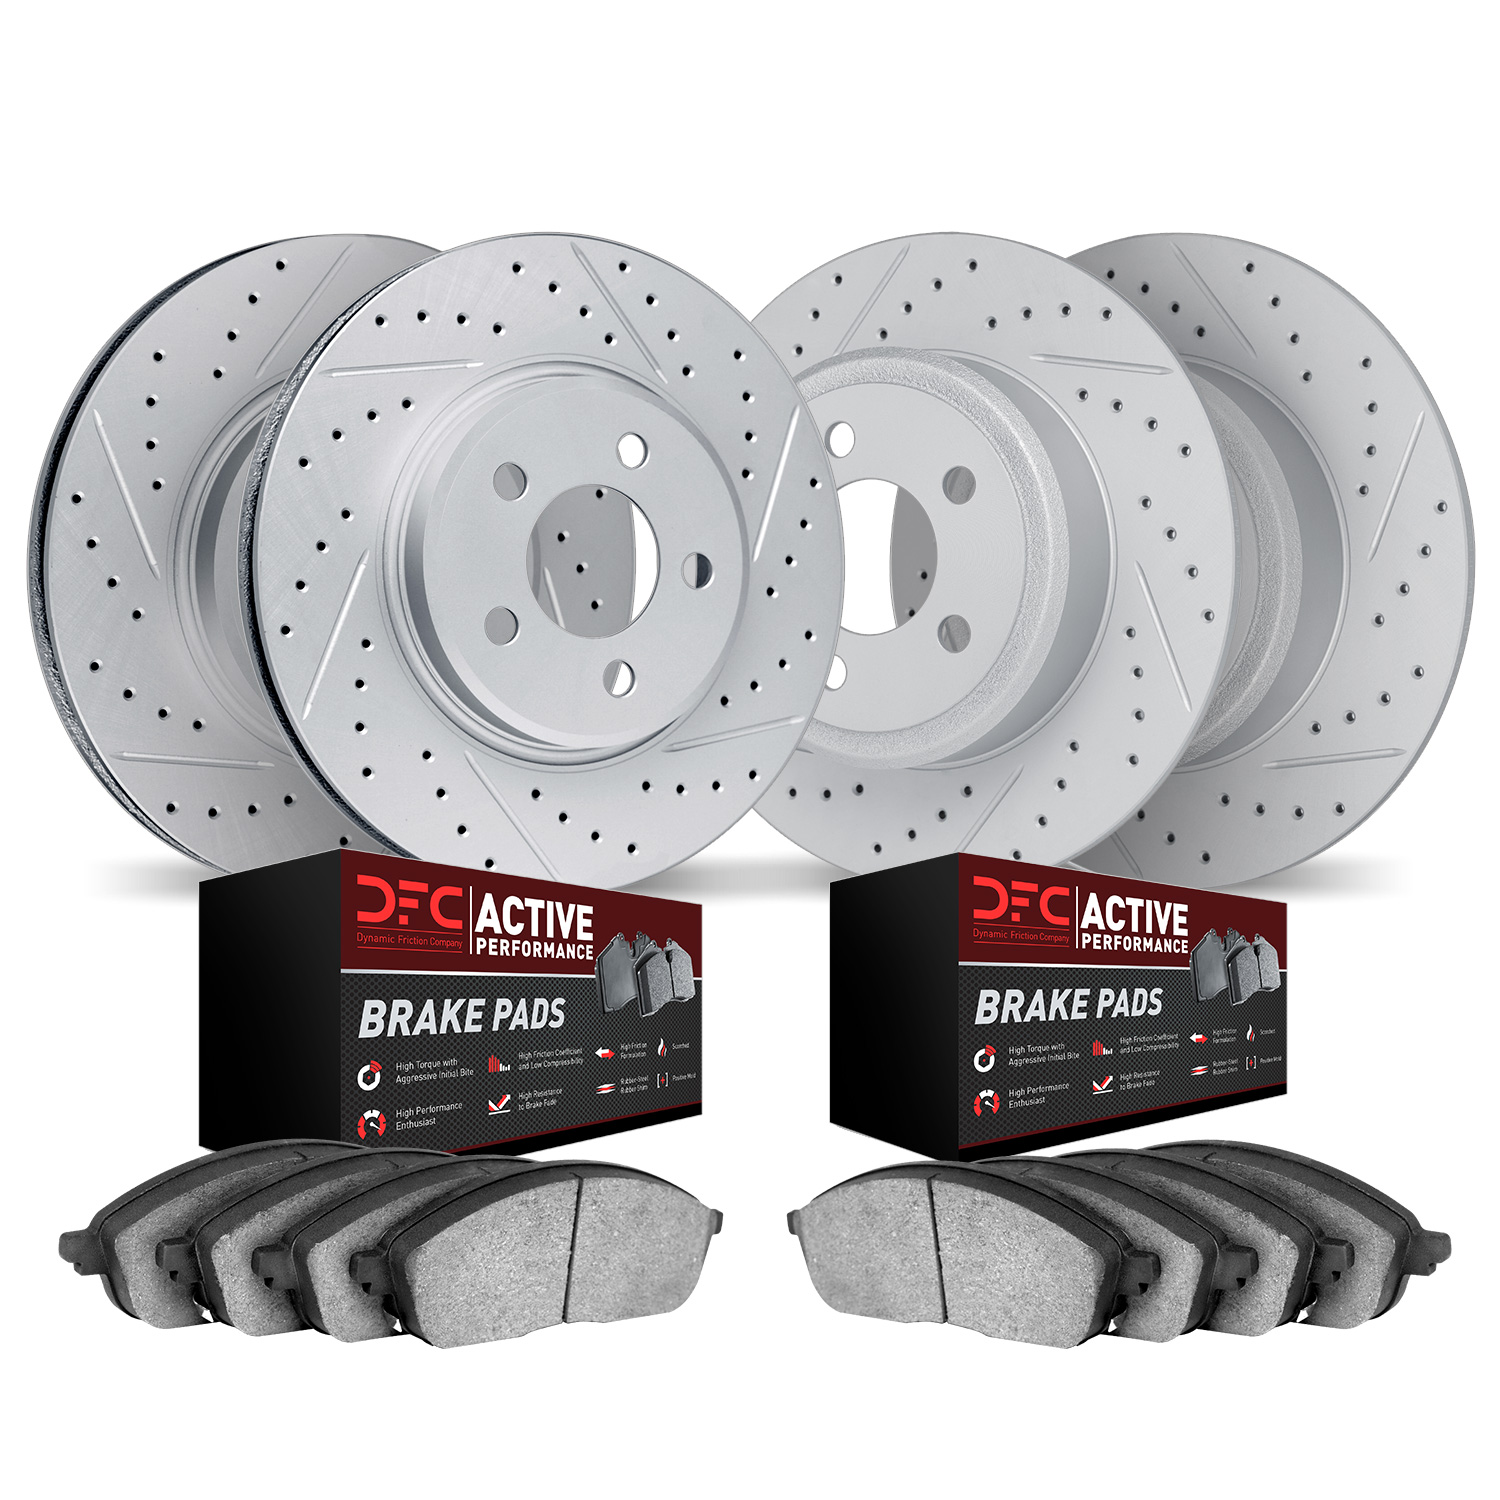 2704-54039 Geoperformance Drilled/Slotted Brake Rotors with Active Performance Pads Kit, 2015-2020 Ford/Lincoln/Mercury/Mazda, P